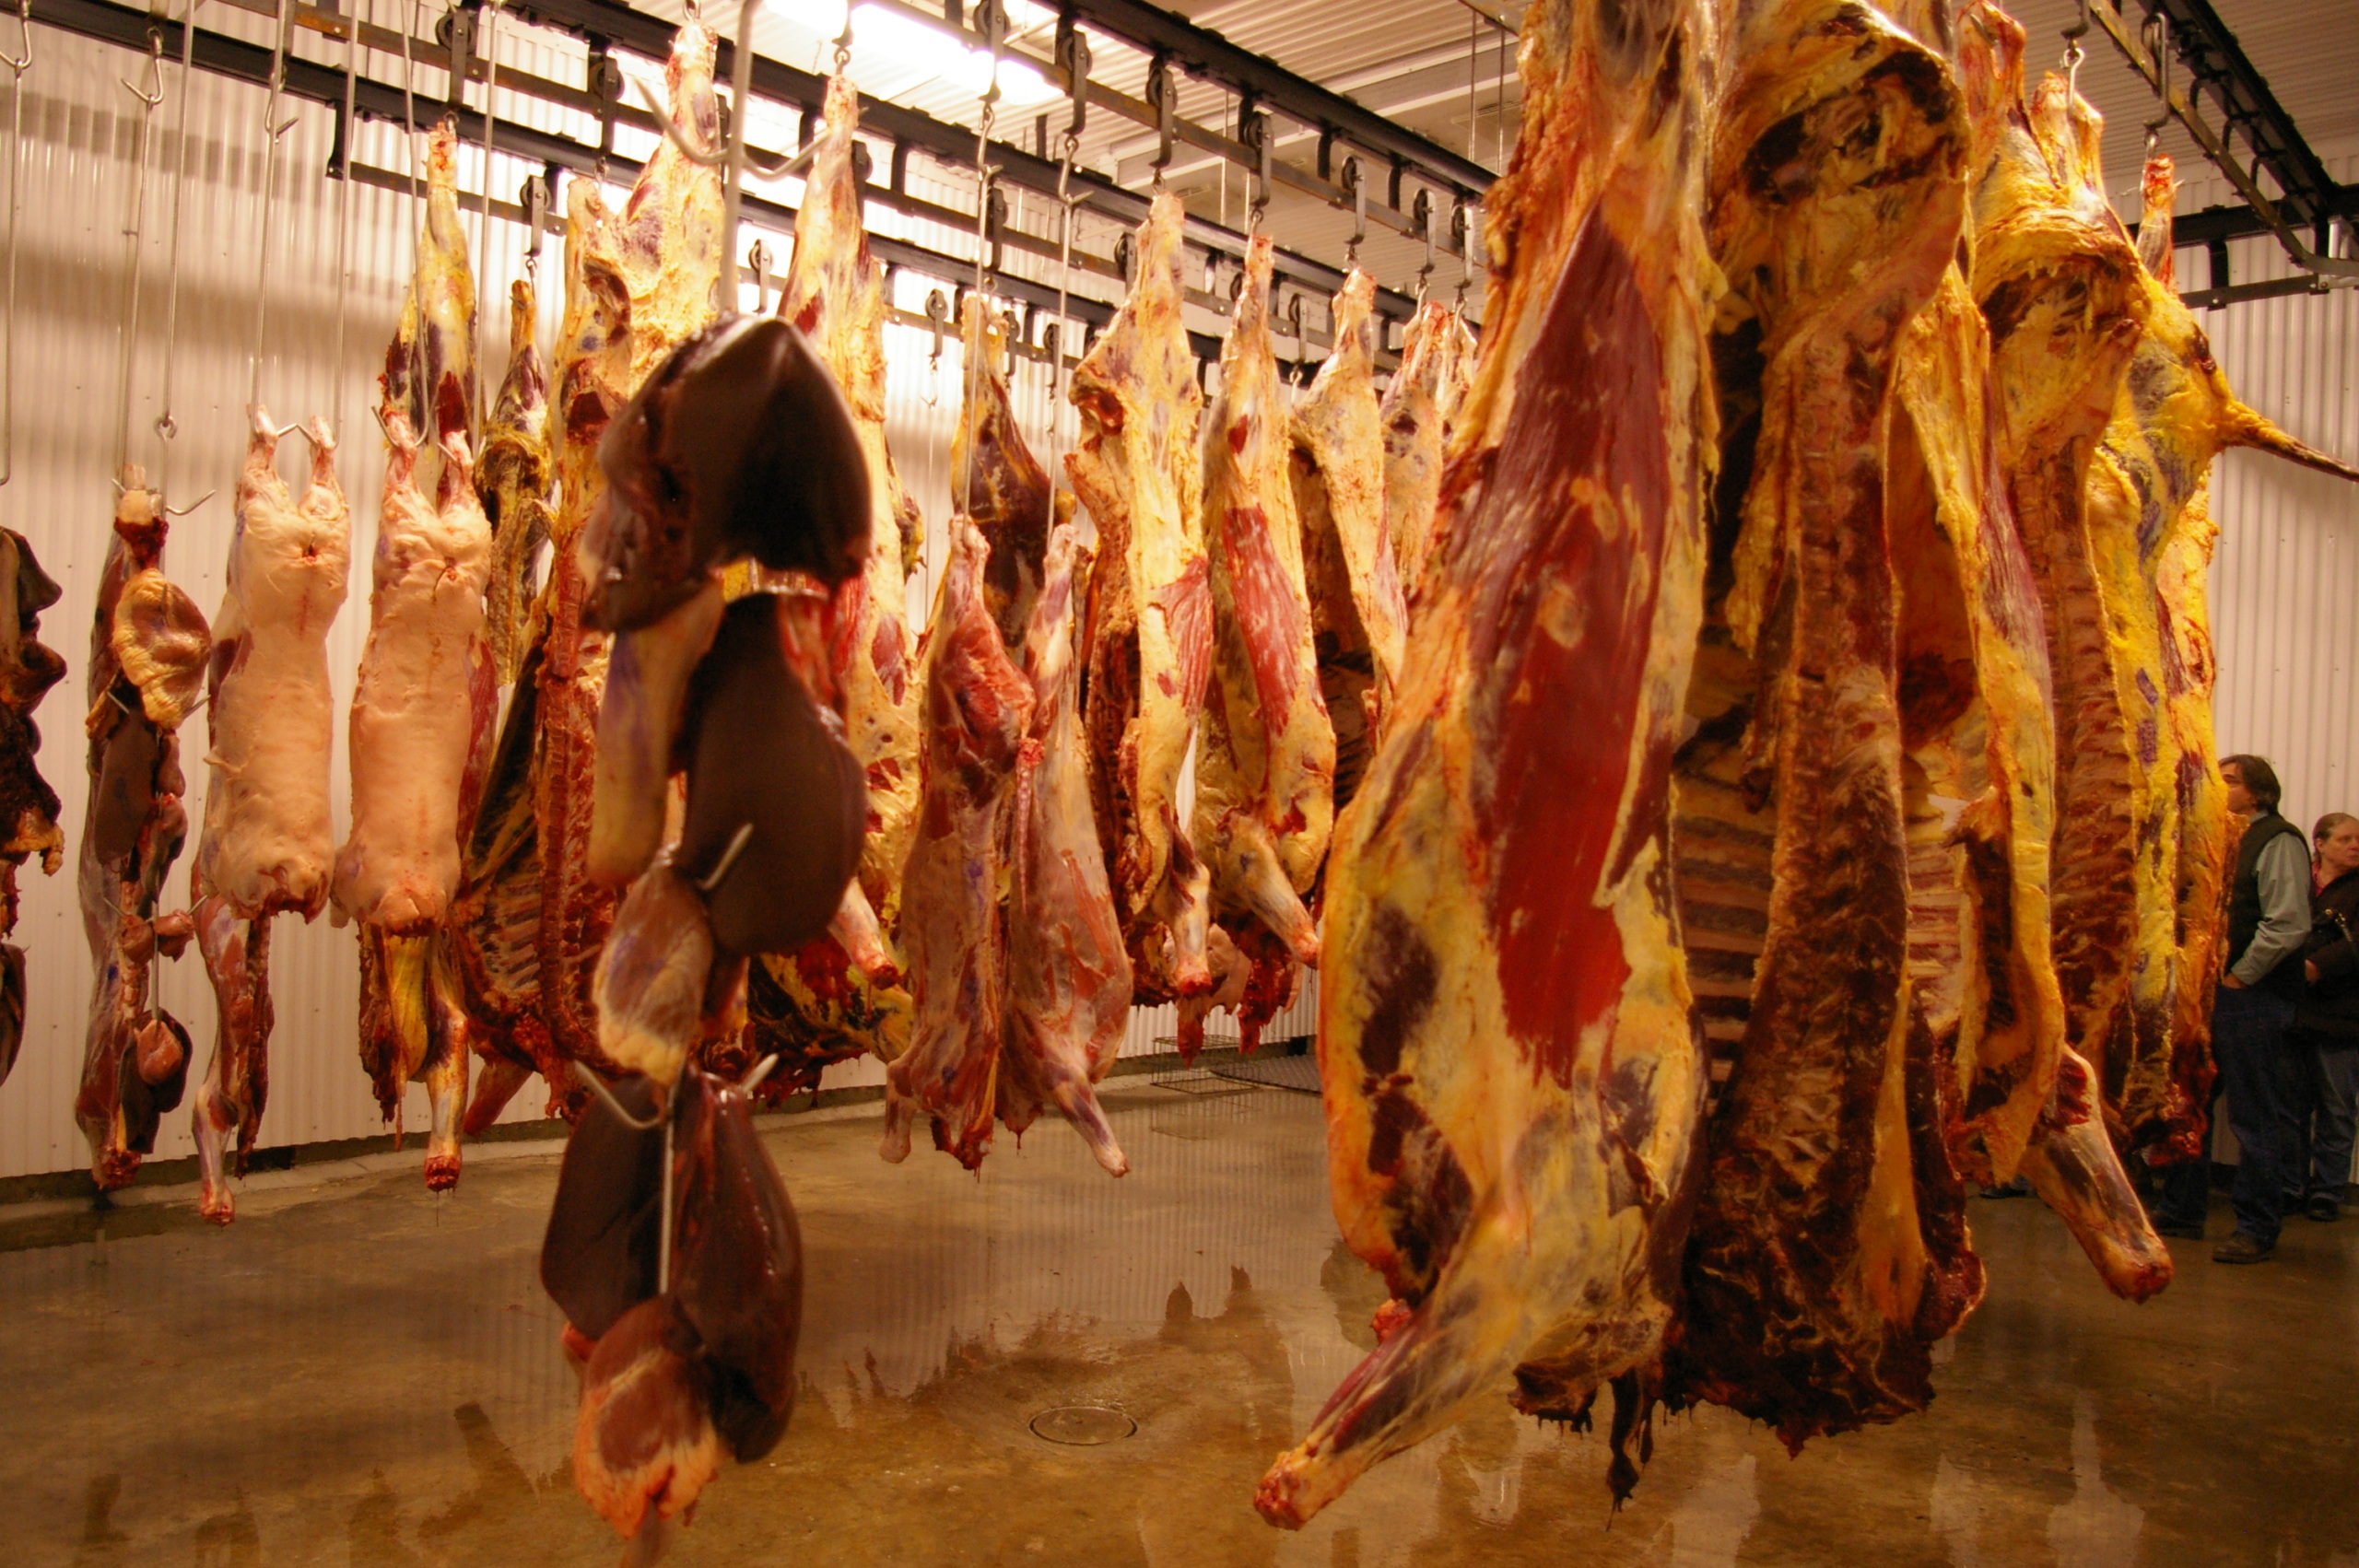 Carcasses hanging in a slaughterhouse